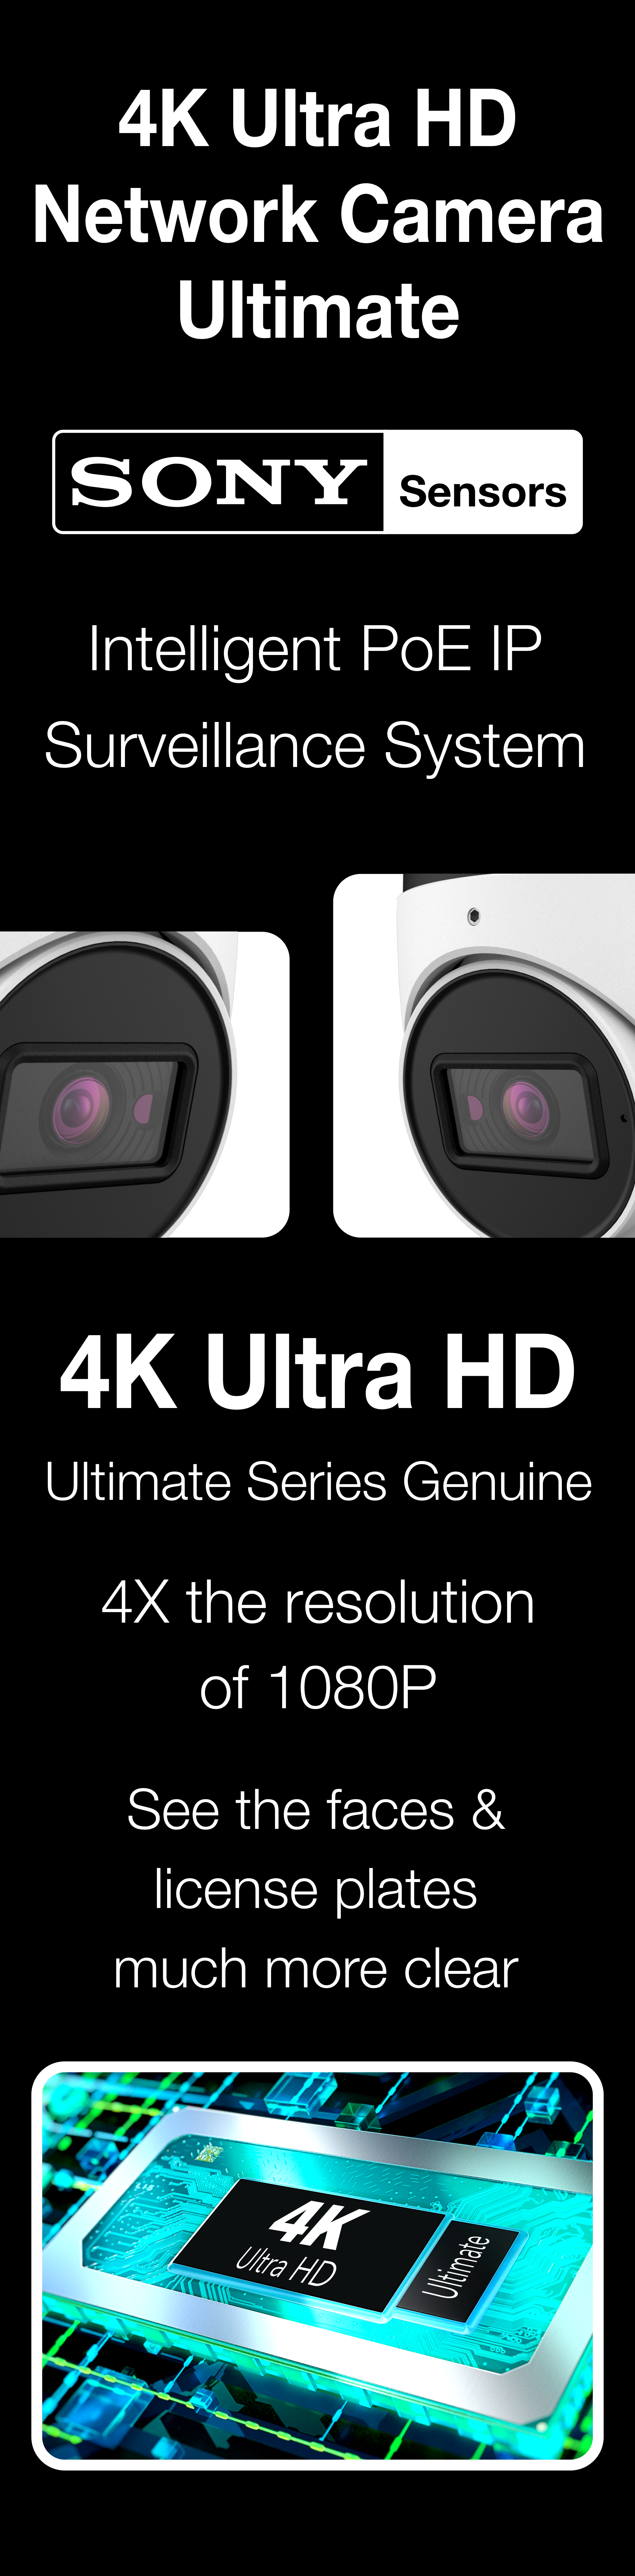 Elder 4K security camera system 8MP Ultimate-I series and NVR surveillance system with Sony sensor cameras. It's 8 megapixel Ultra HD 4x the resolution of full HD 1080p.